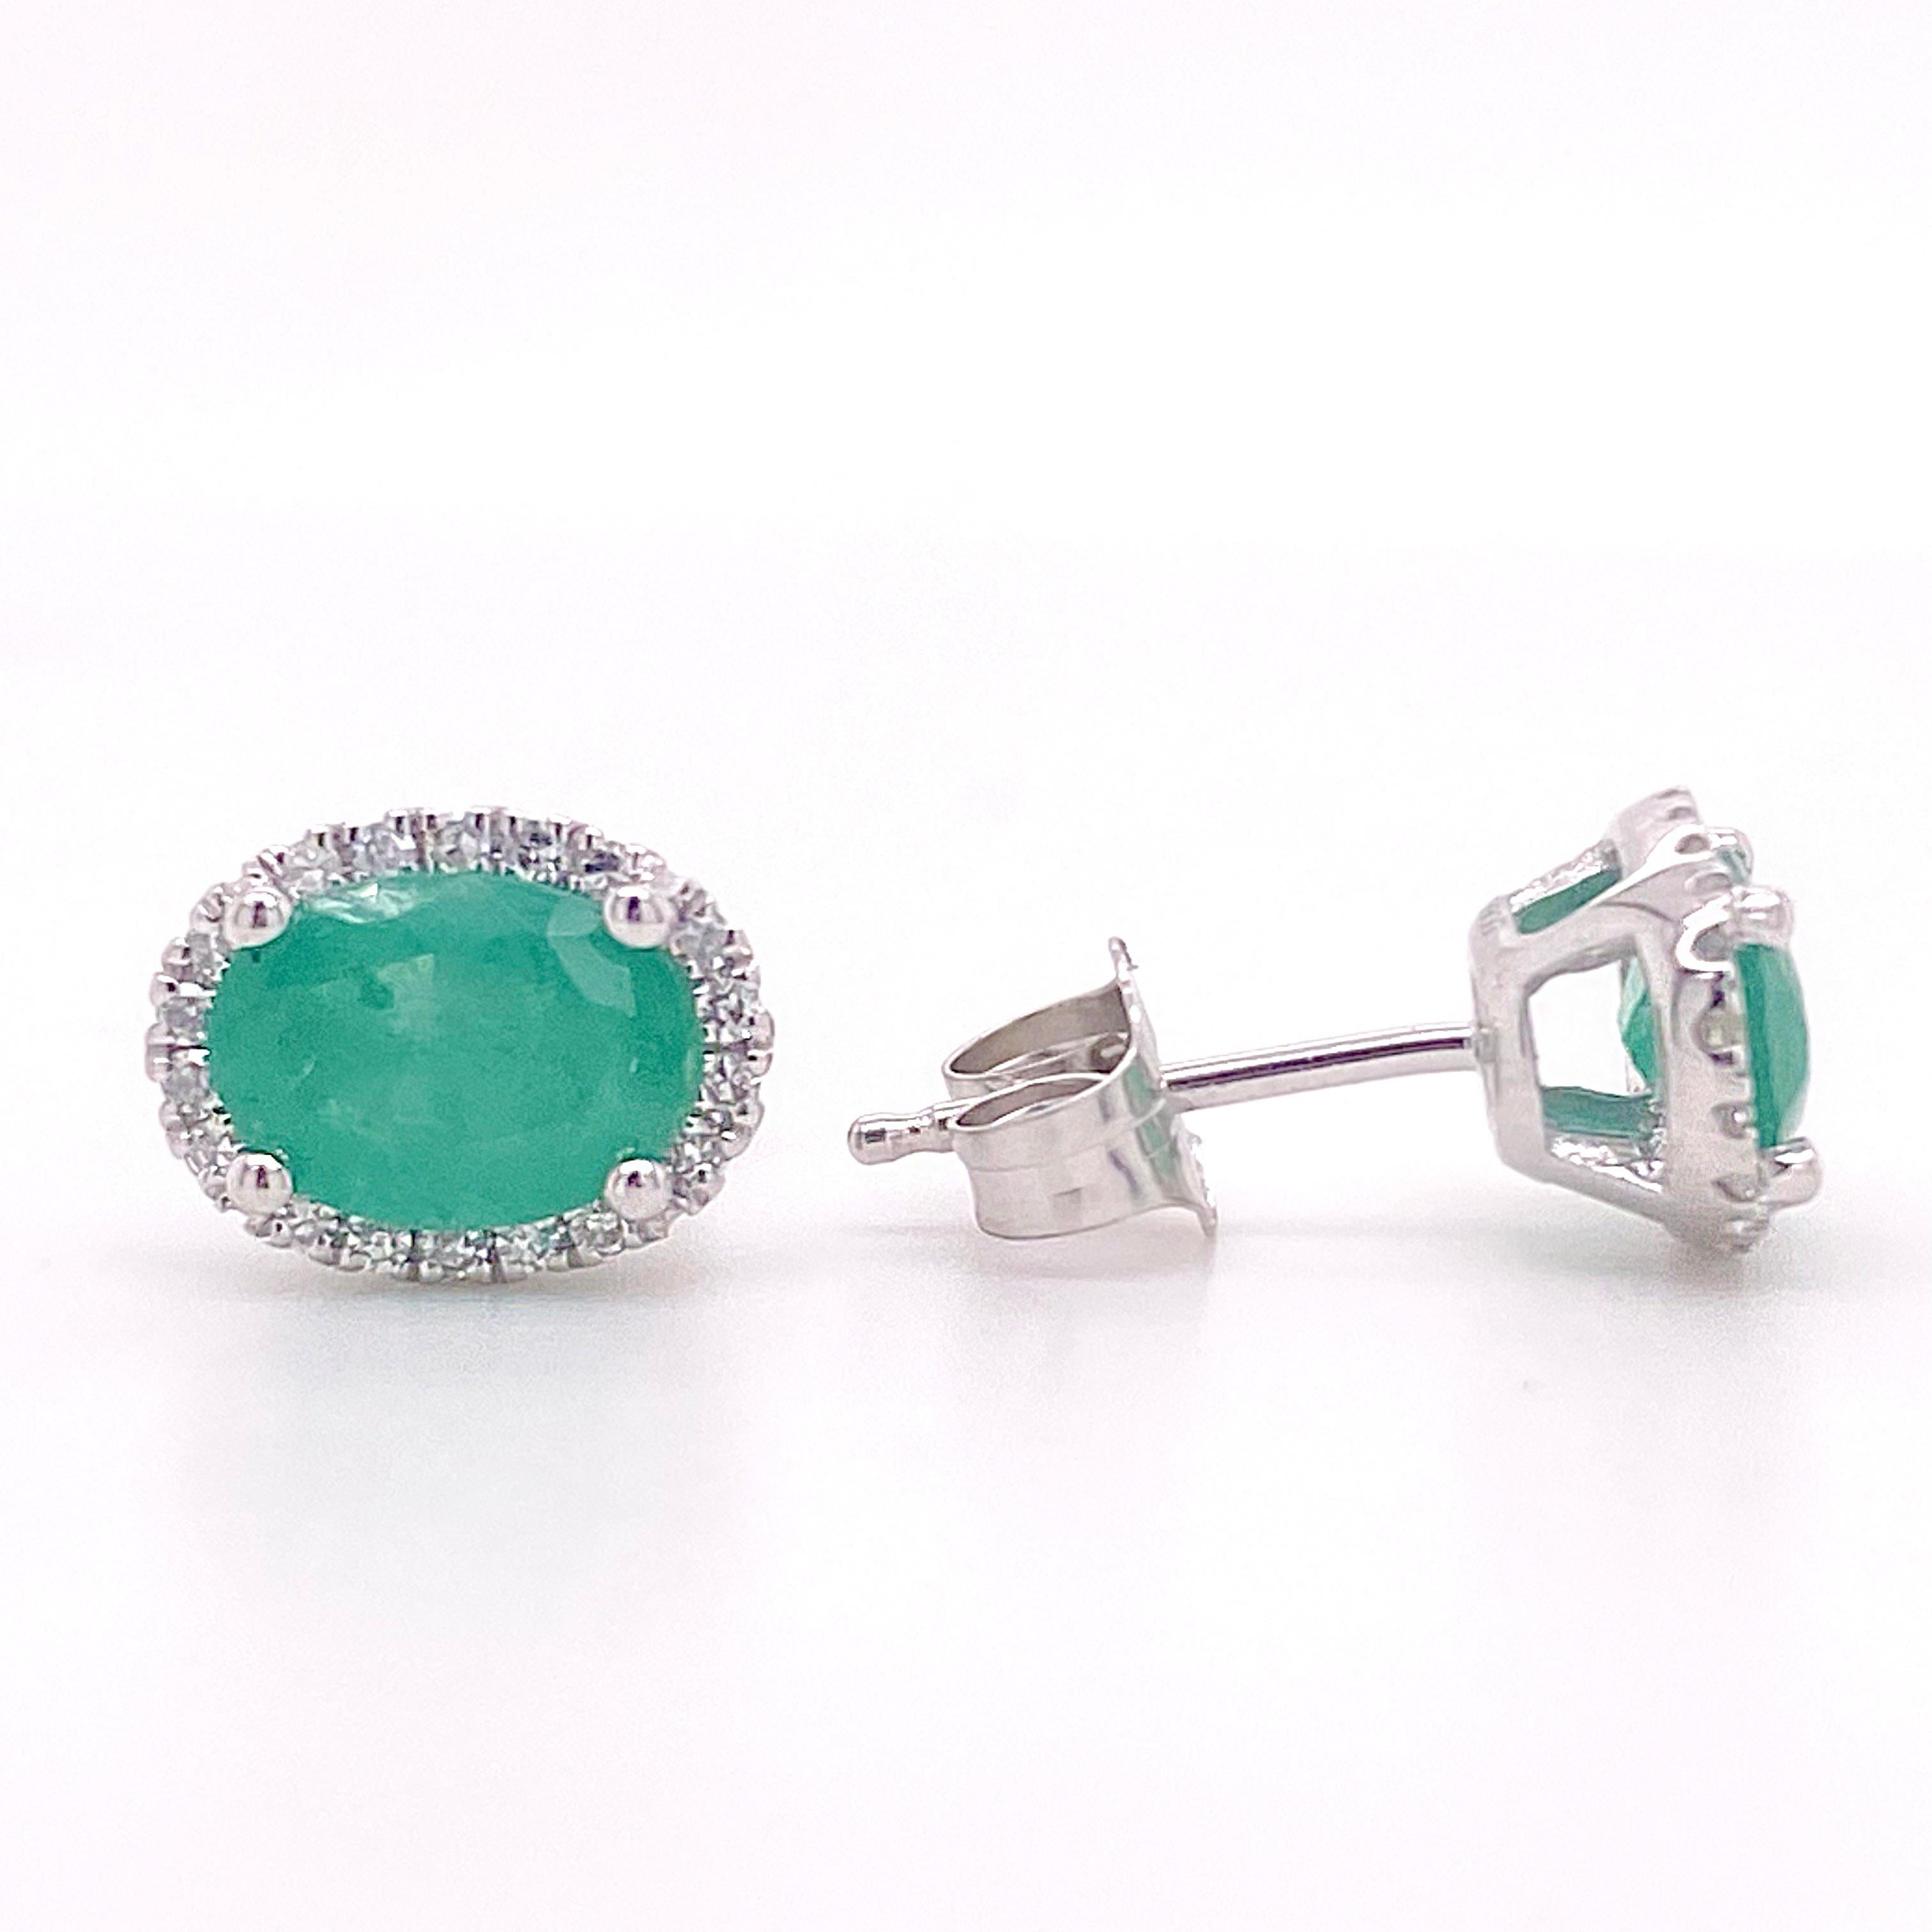 These emerald earrings are the perfect stud style for anyone! Emeralds are known for their “harden” which is the garden growing within the emerald. If you see an emerald that is perfectly clear, it is usually synthetic or lab grown and created. 